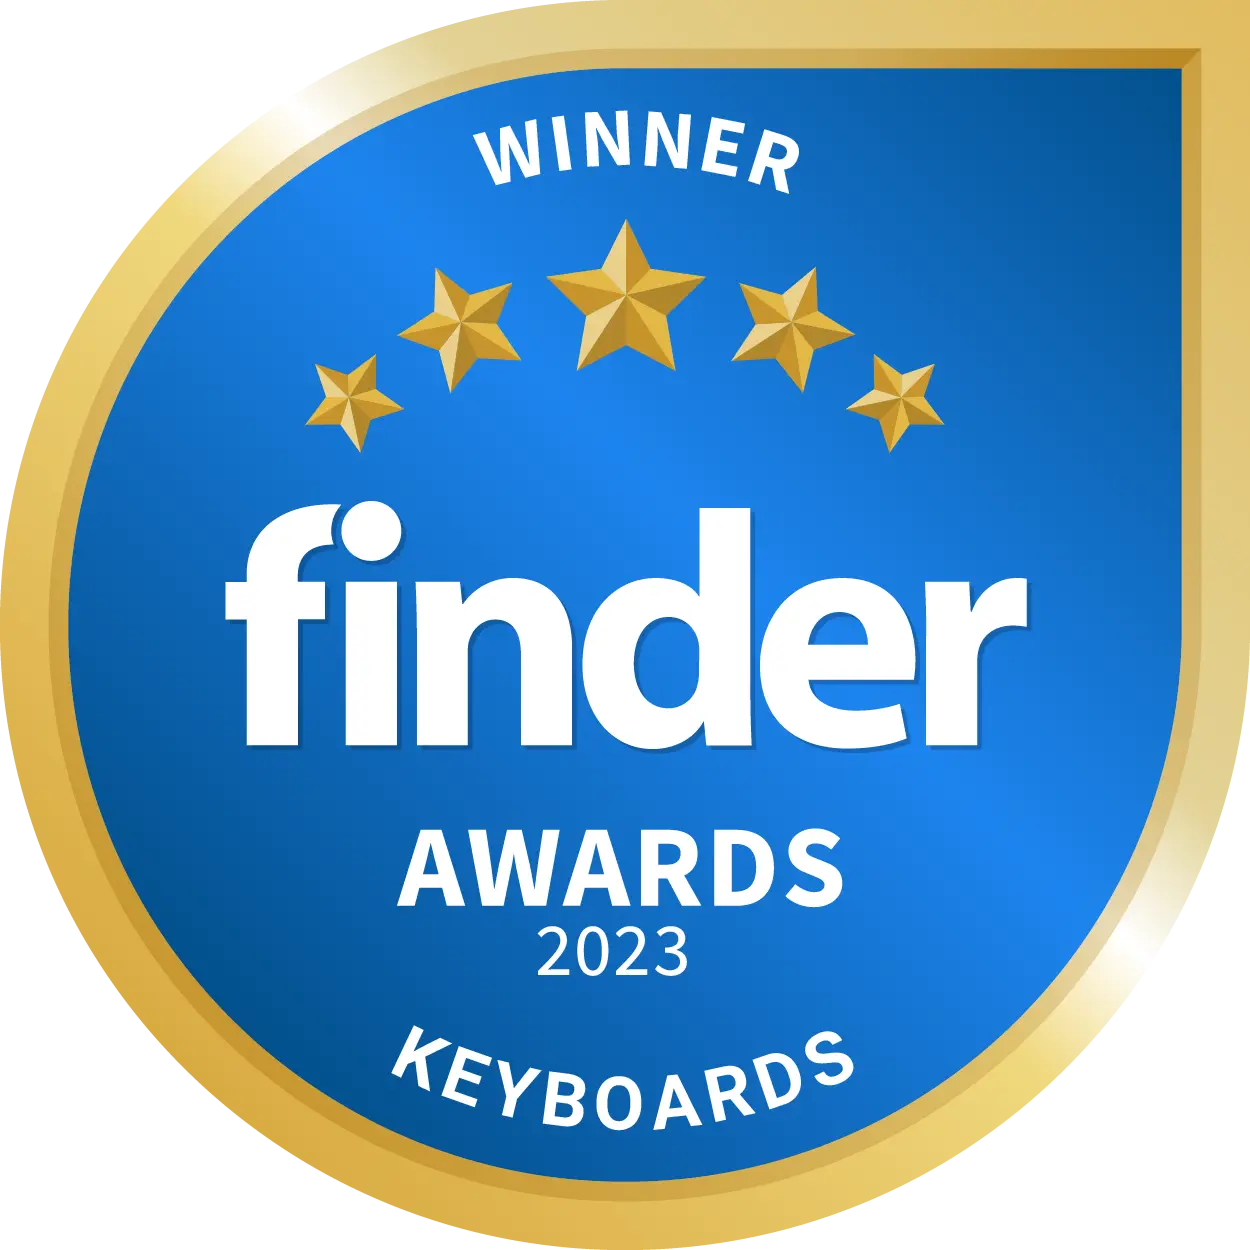 Best-rated keyboard brand